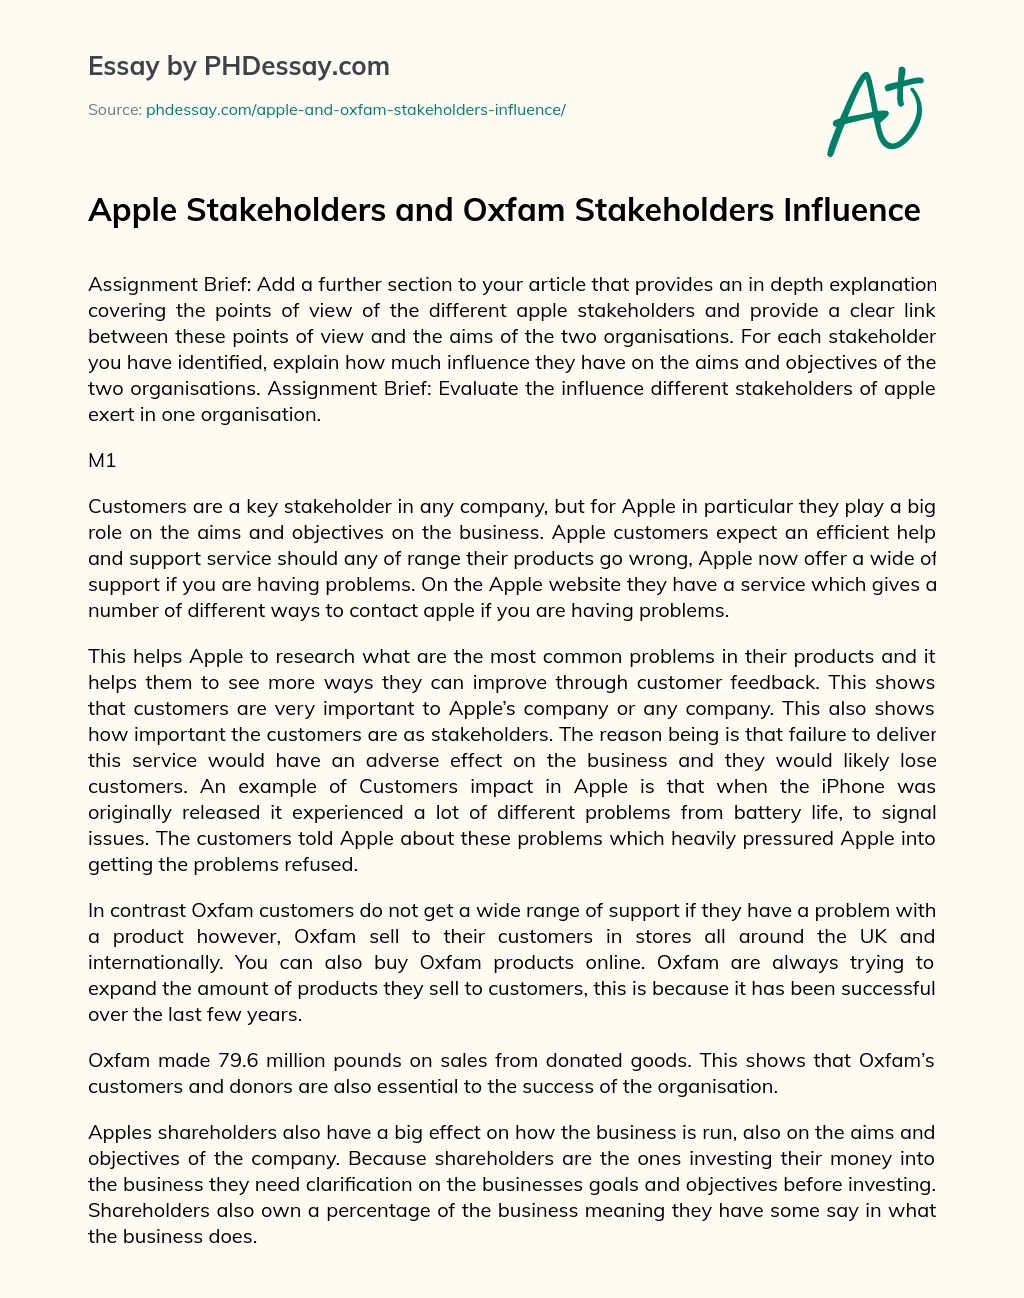 Apple Stakeholders and Oxfam Stakeholders Influence essay